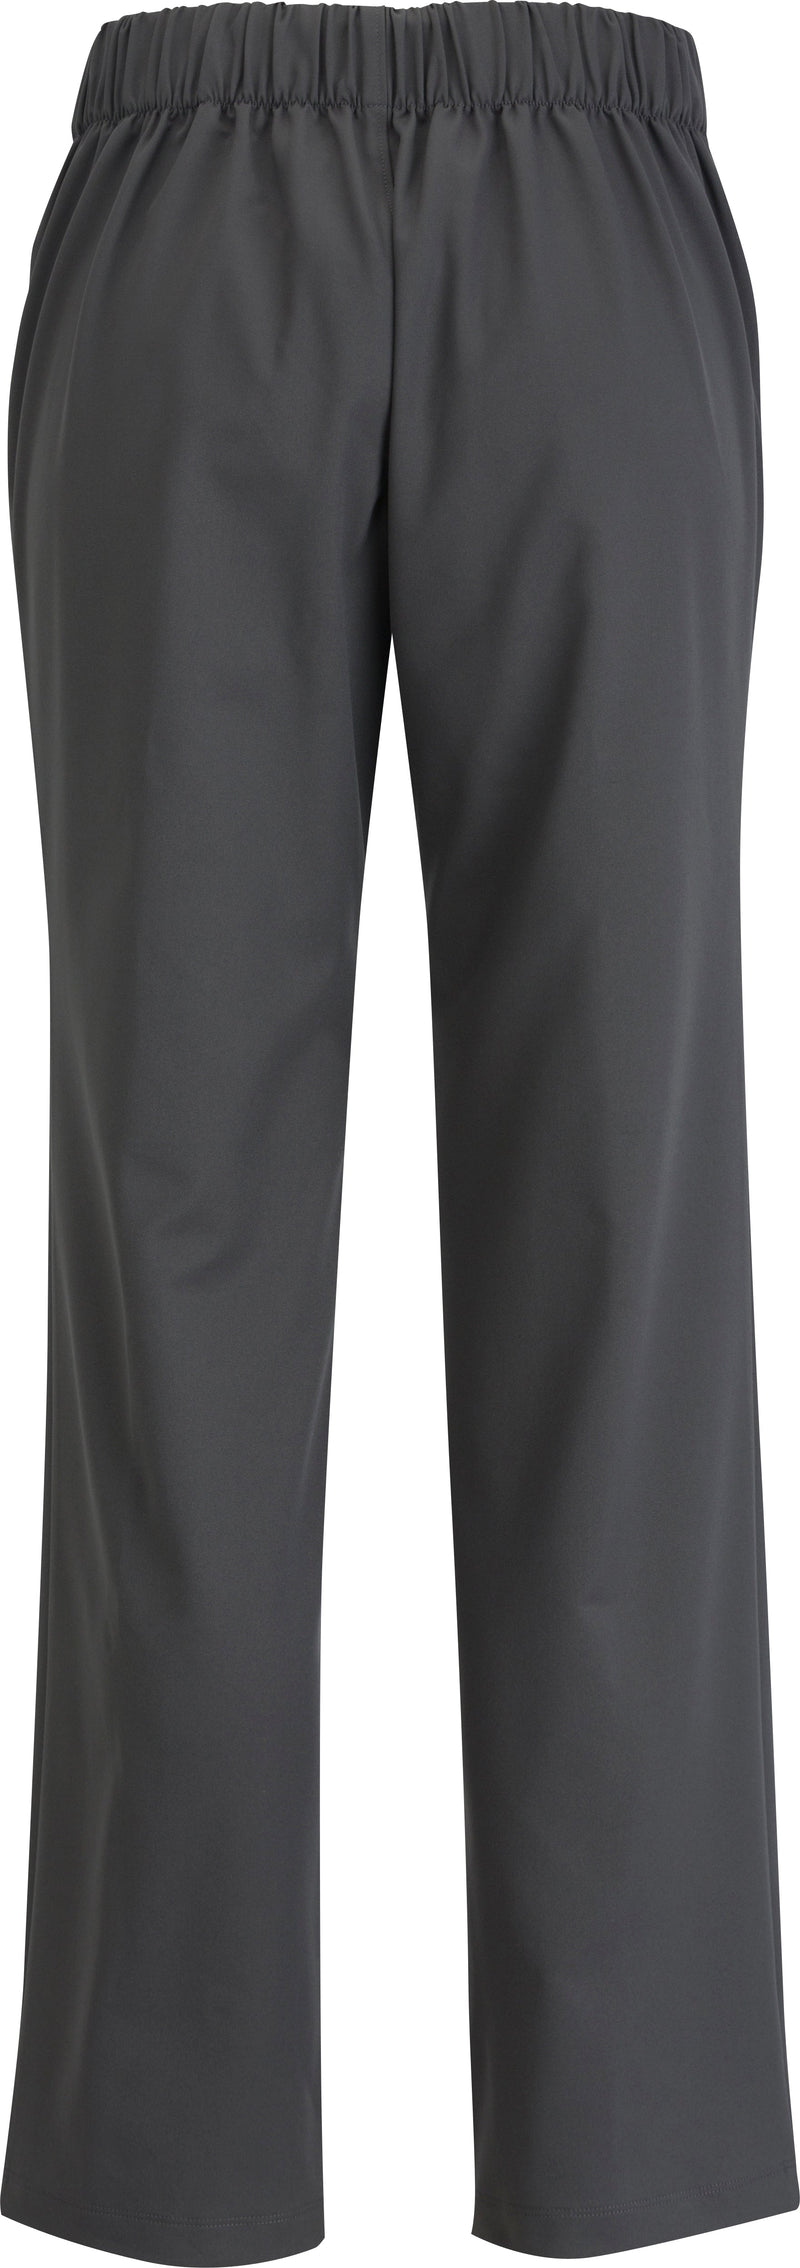 [8861] Sorrento Power Stretch Straight Leg Pant. Live Chat For Bulk Discounts.